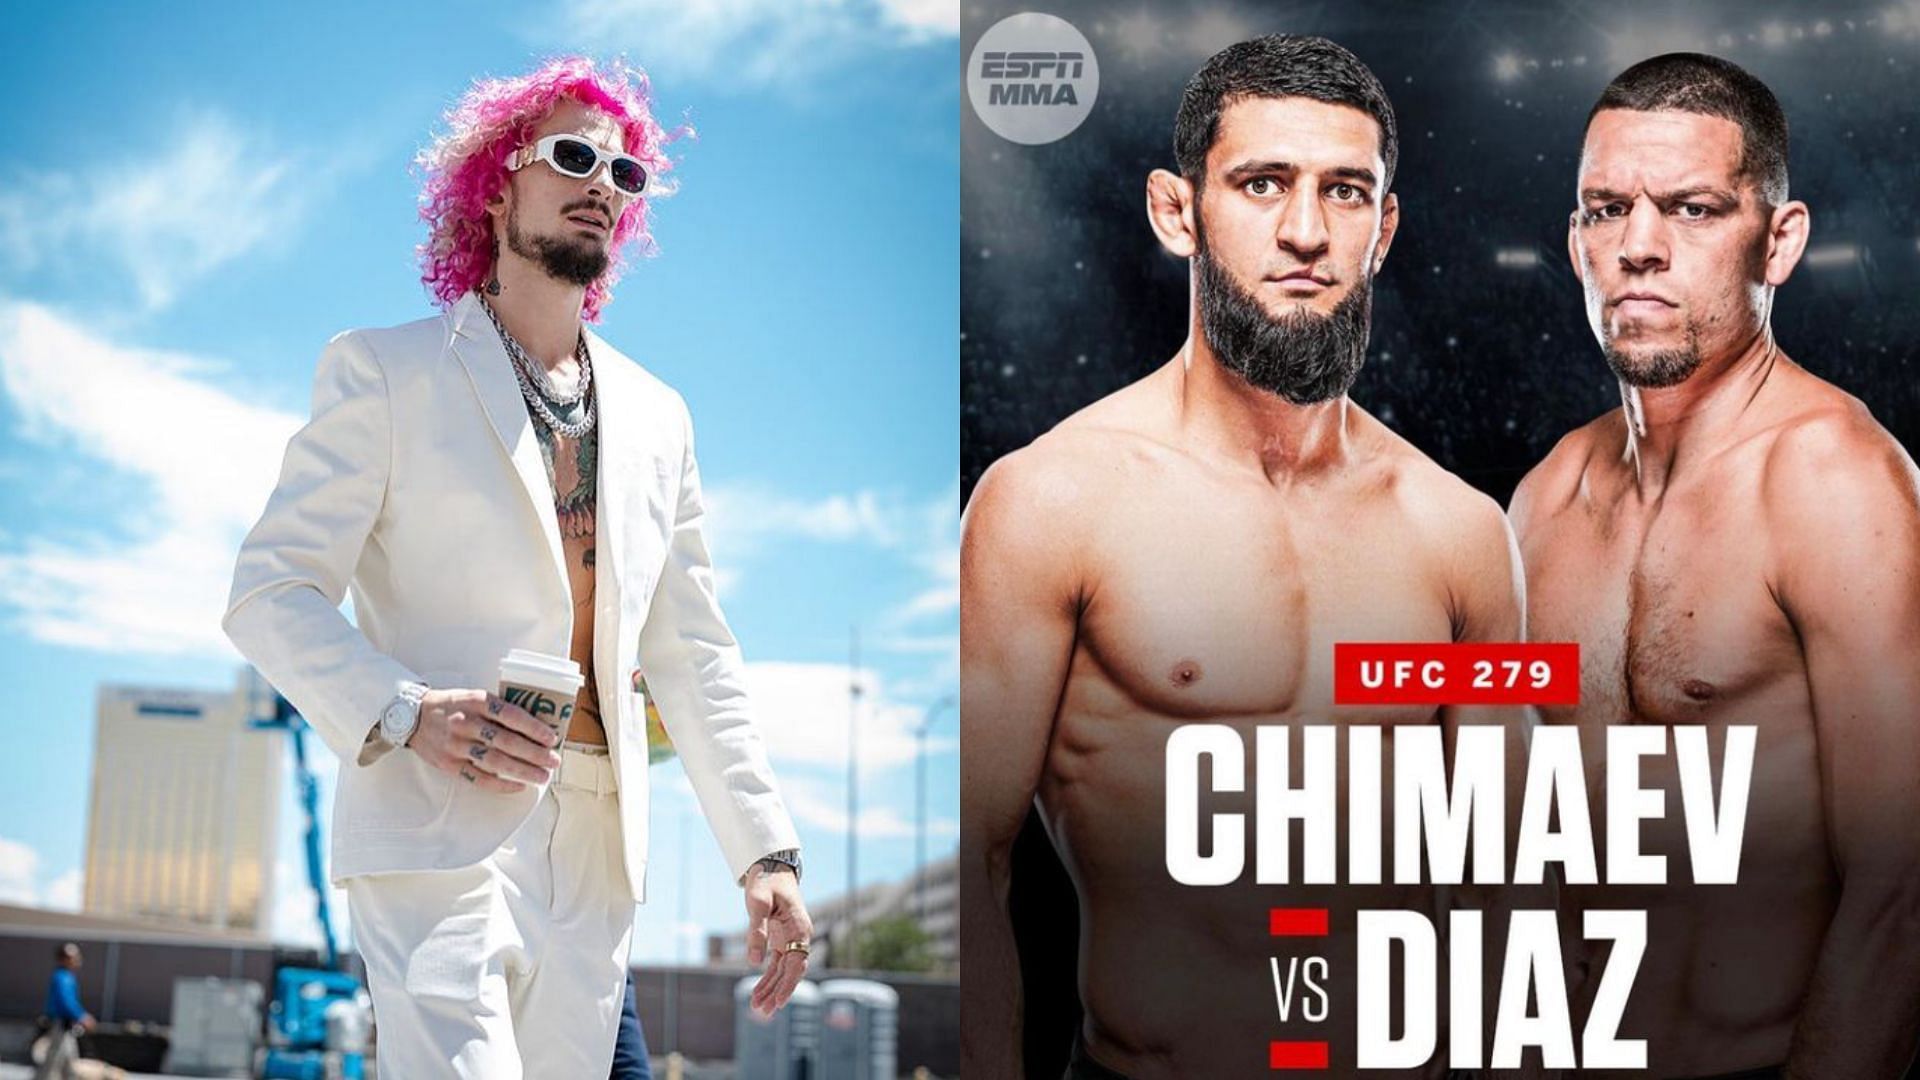 Sean O&#039;Malley (left) and UFC 279 poster (right); [Image Courtesy: @sugaseanmma and @ufc on Instagram]